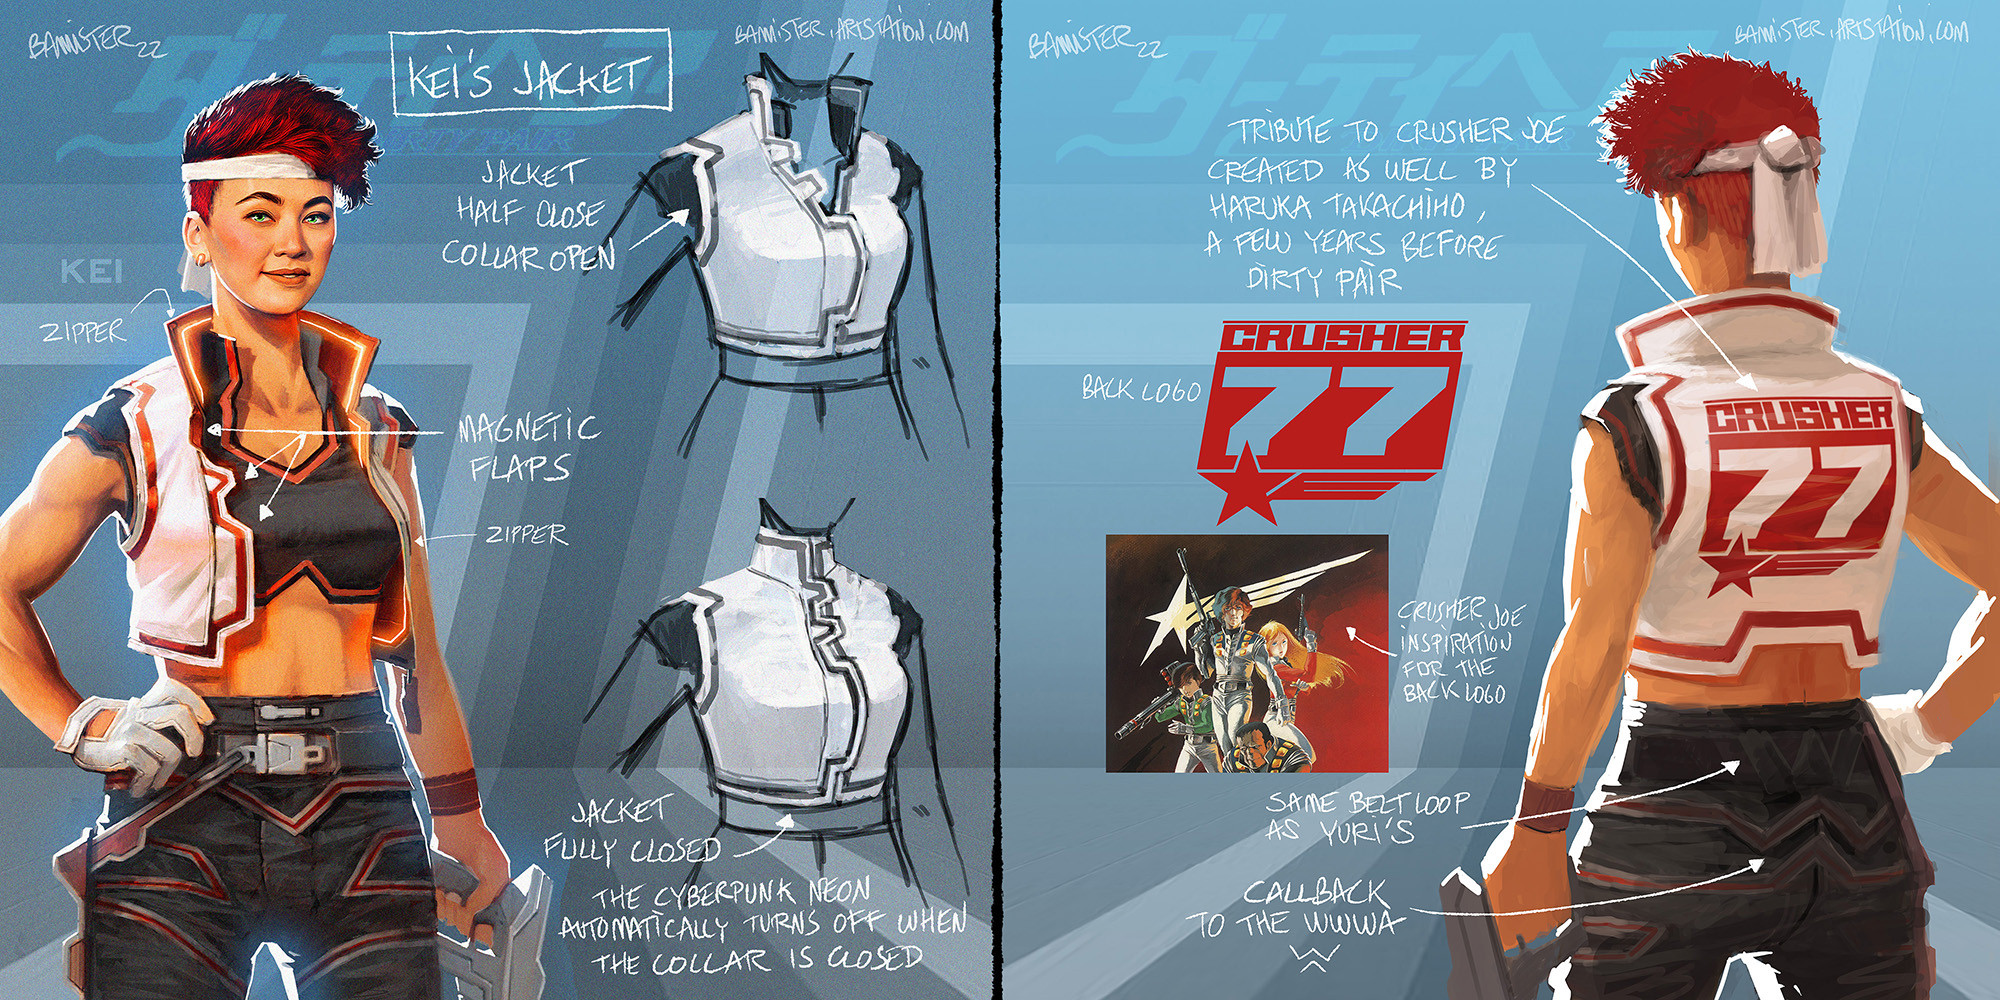 Kei's jacket, is a tribute to Crusher Joe, created by Haruka Takachiho before Dirty Pair. Both projects live in the same universe, and cross over from time to time in the OAVs and the DP movie.
Keeping it simple, easily readable and reproductible.